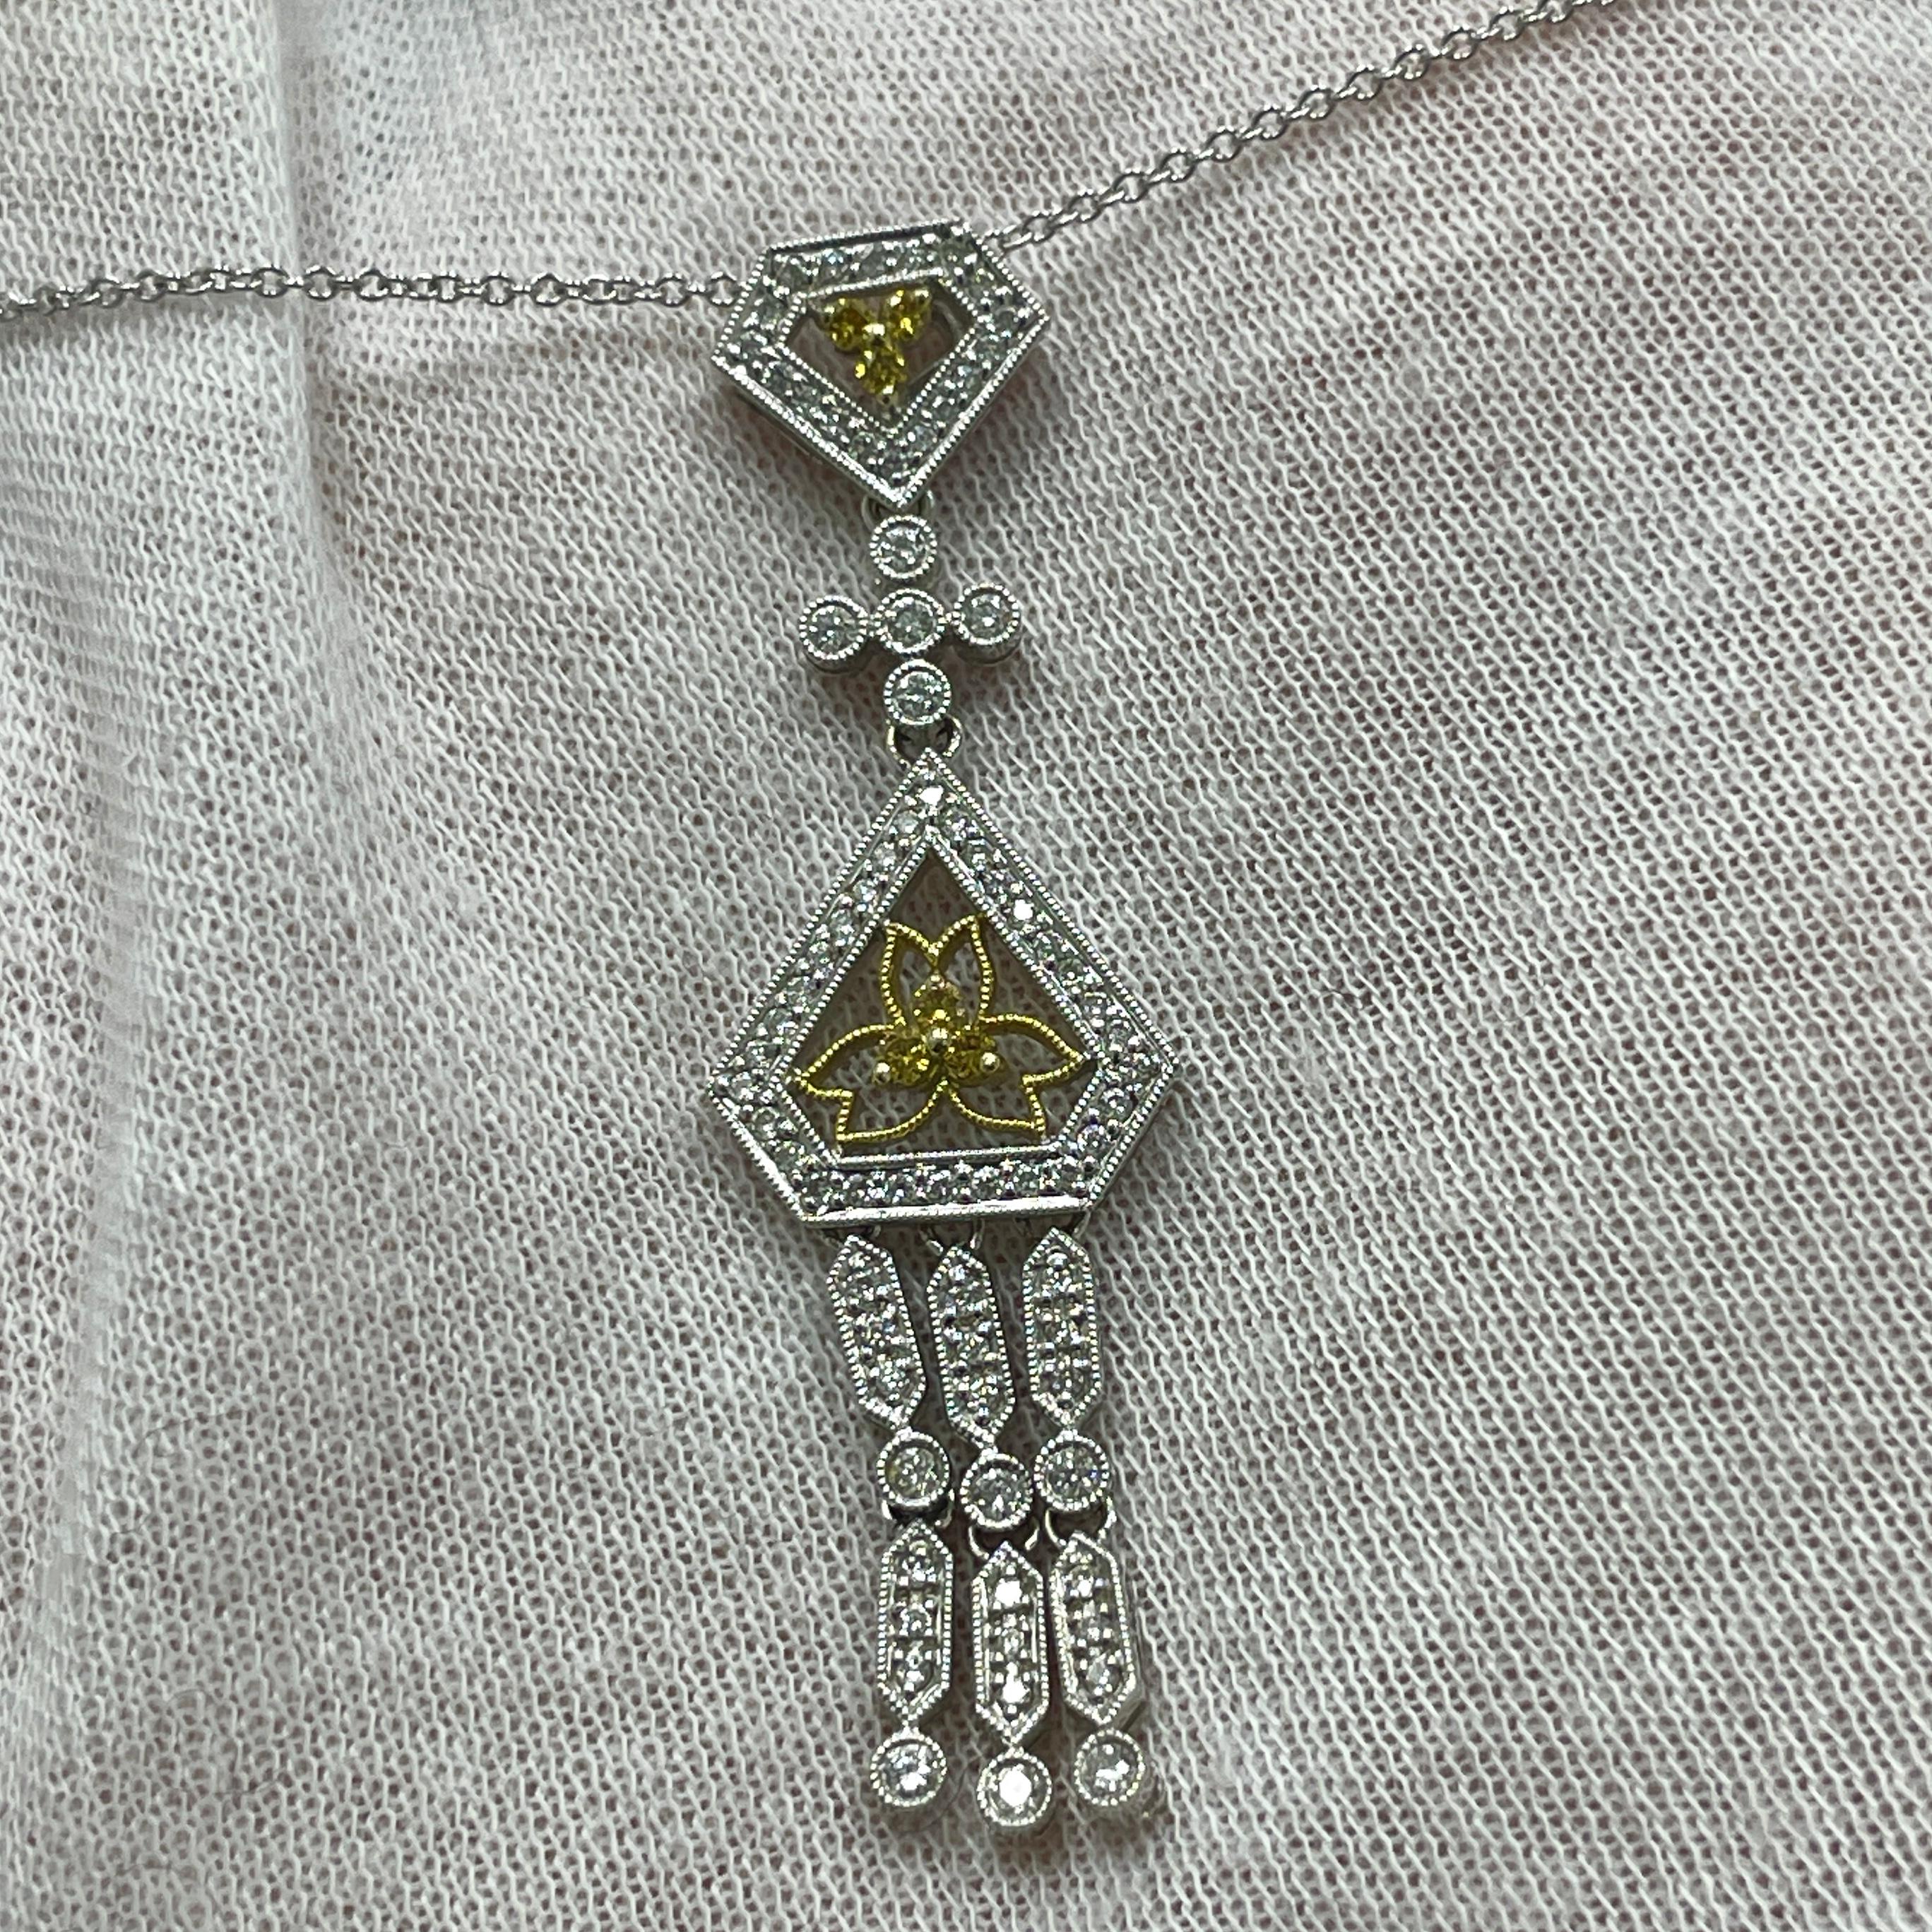 An intricately designed pendant with 0.55Ct of white diamonds, .08Ct of yellow diamonds set in 18K white gold. 